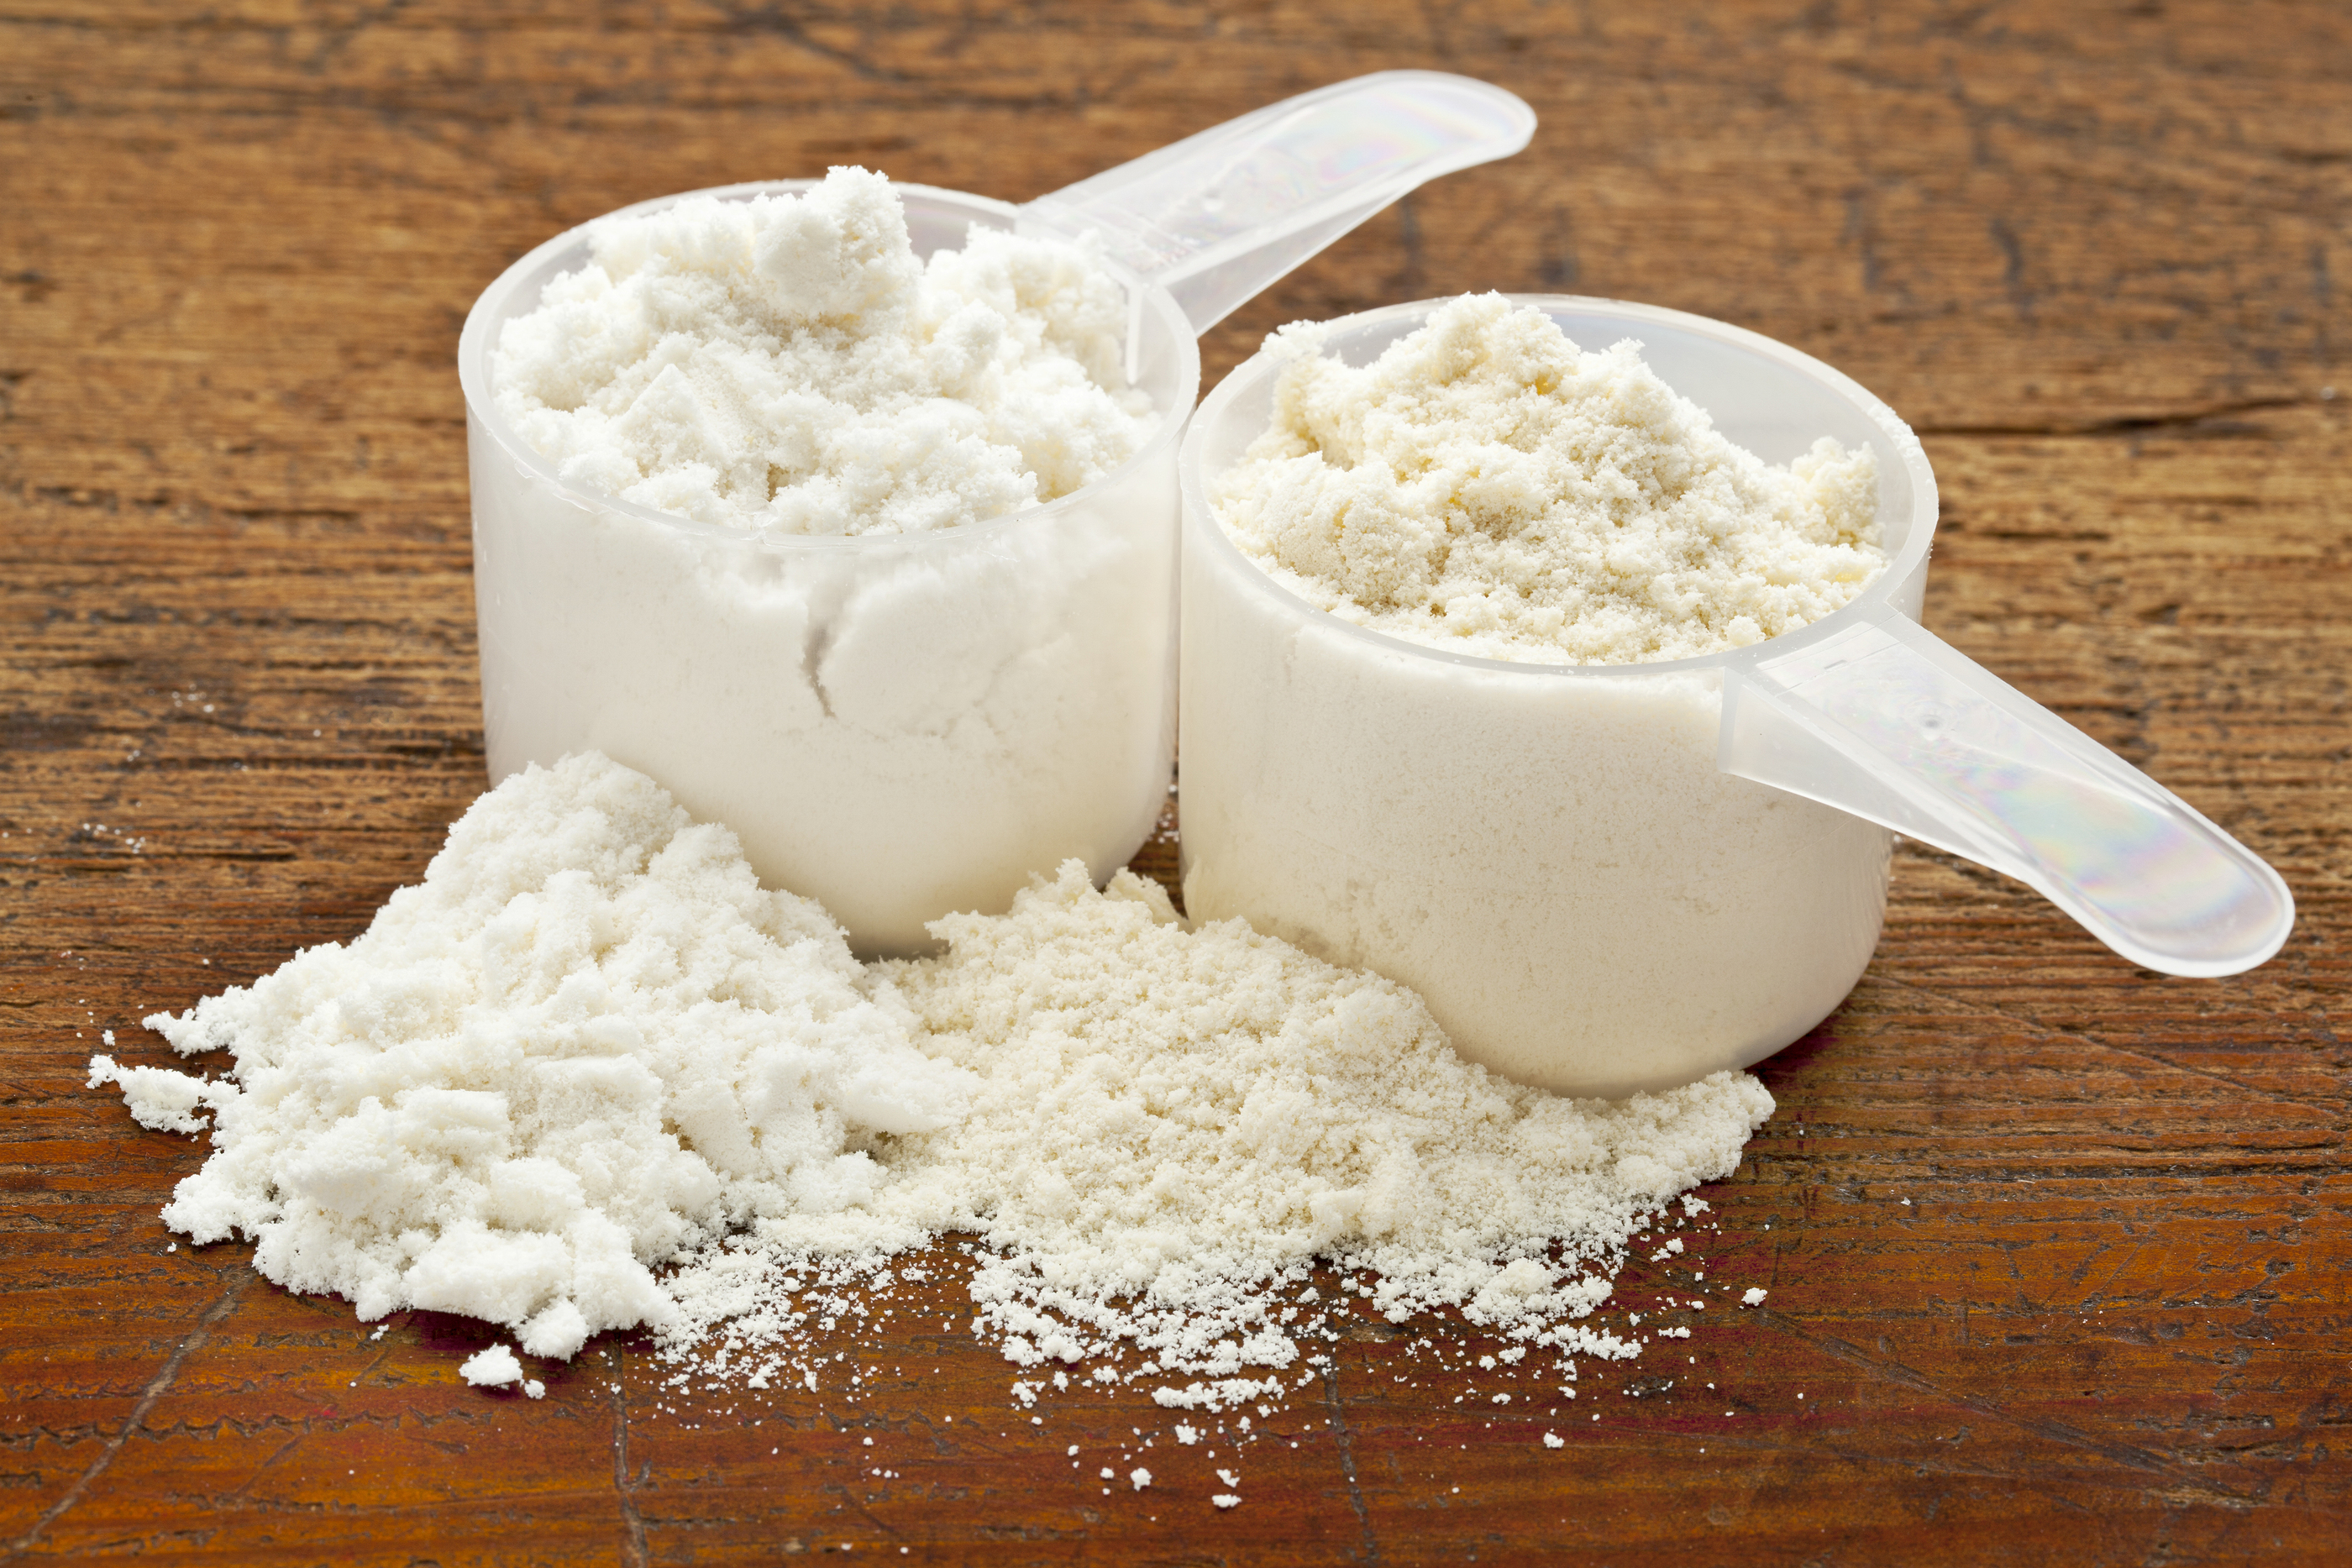 Immune Supporting Nutrients Pt4 of 4: Whey Protein Isolate